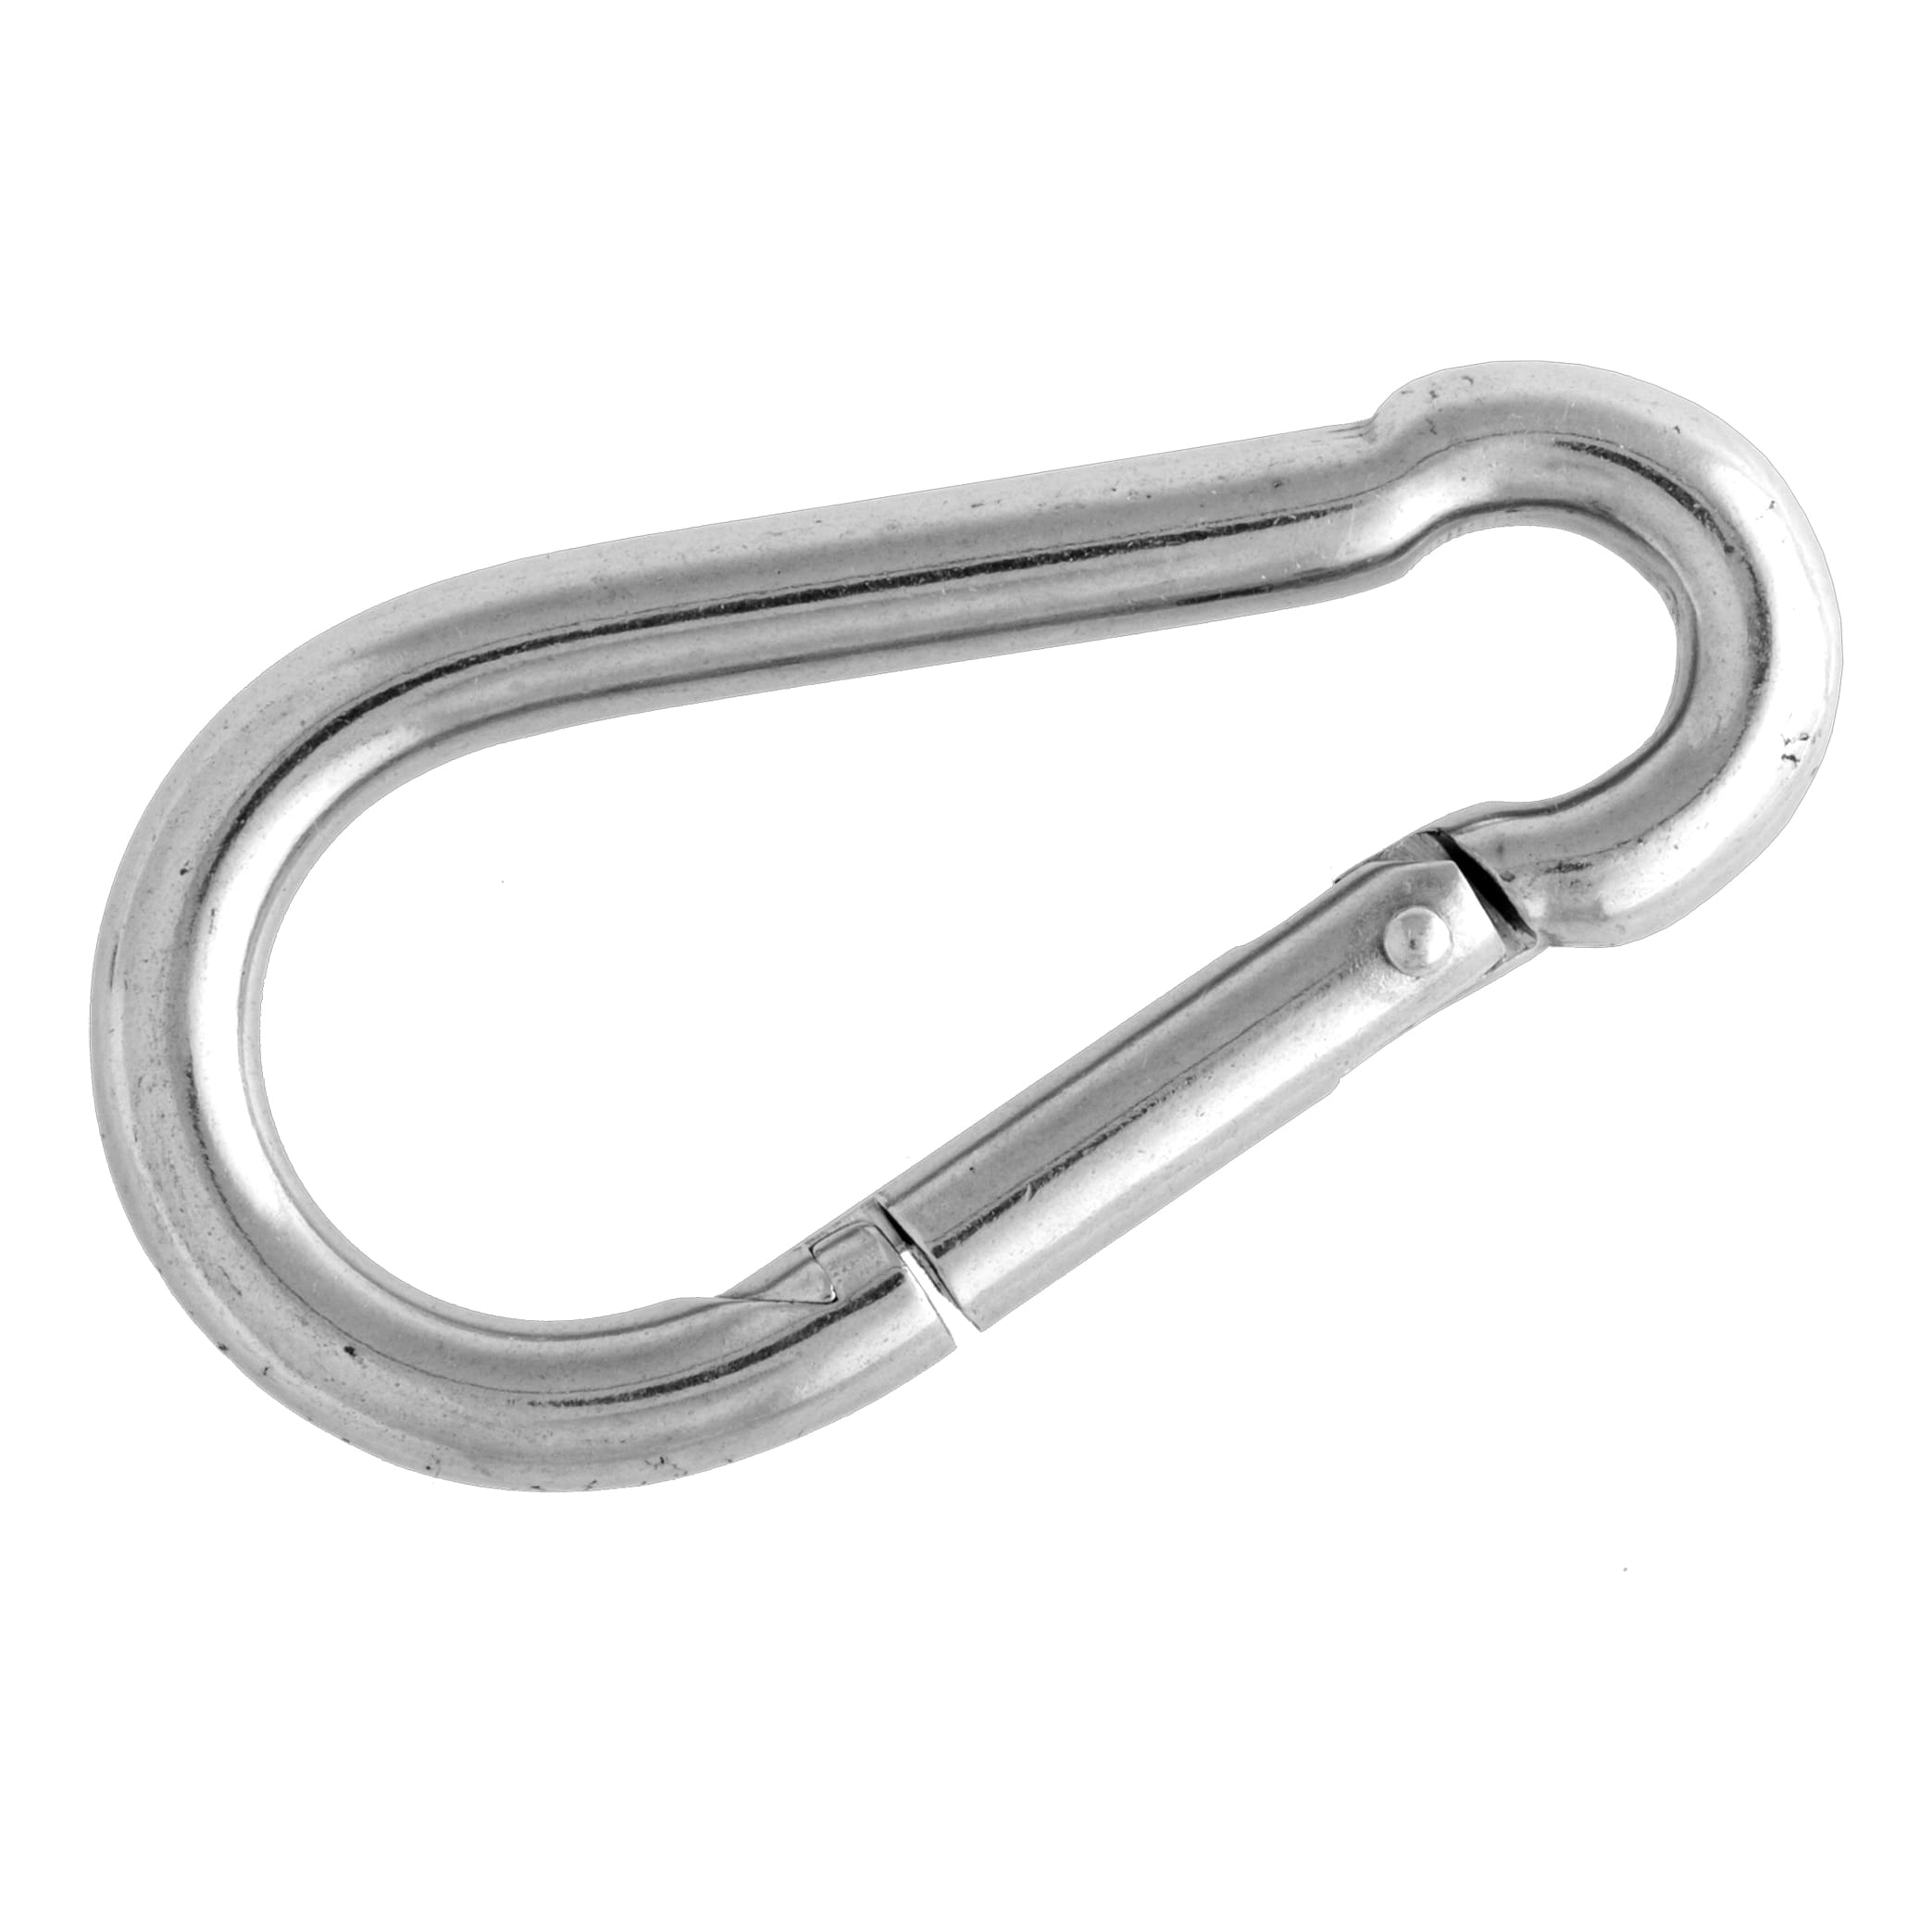 Bass Pro Shops® Stainless Safety Spring Hooks